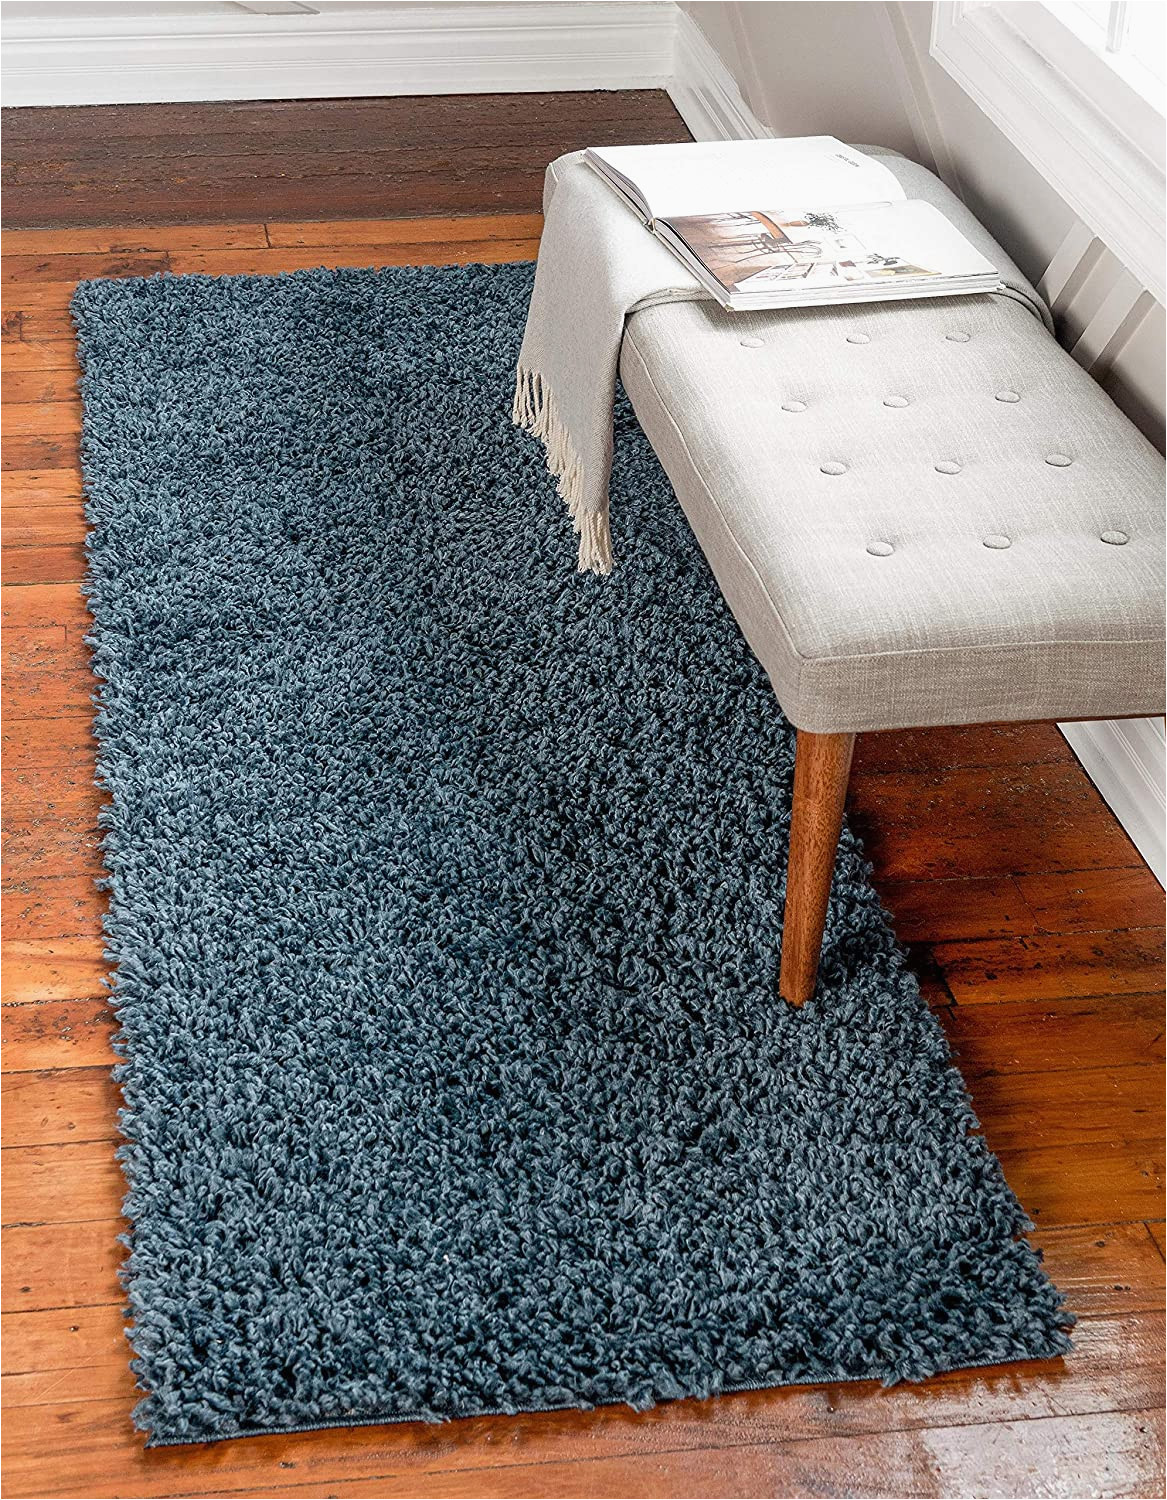 Solid Blue Runner Rug Unique Loom Davos Shag Collection Contemporary soft Cozy solid Shag Marine Blue Runner Rug 2 2 X 6 7